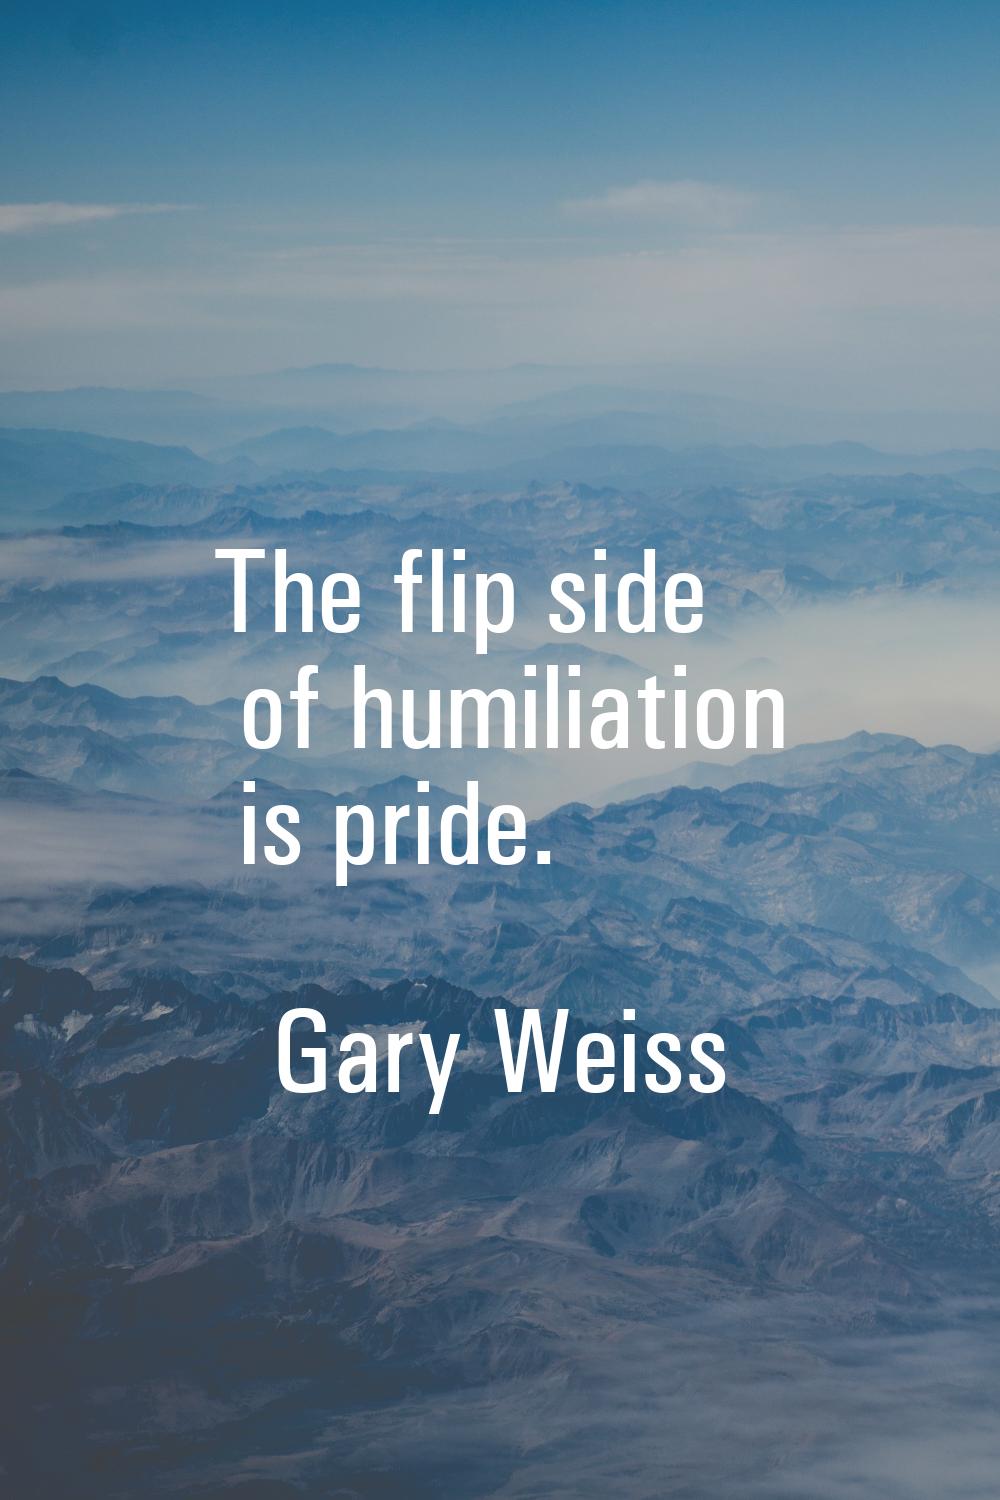 The flip side of humiliation is pride.